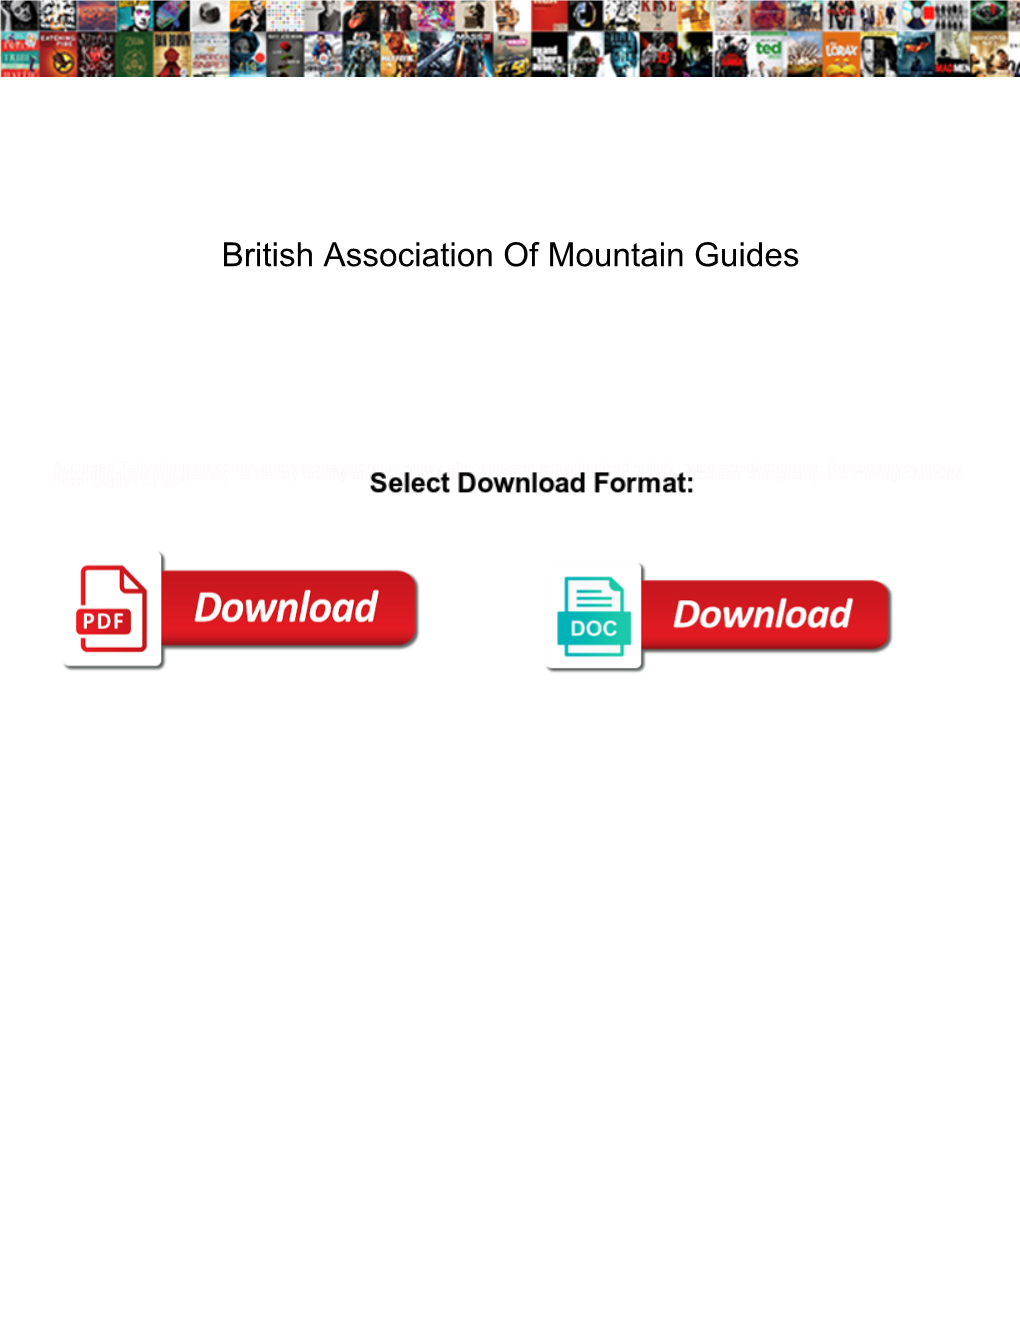 British Association of Mountain Guides